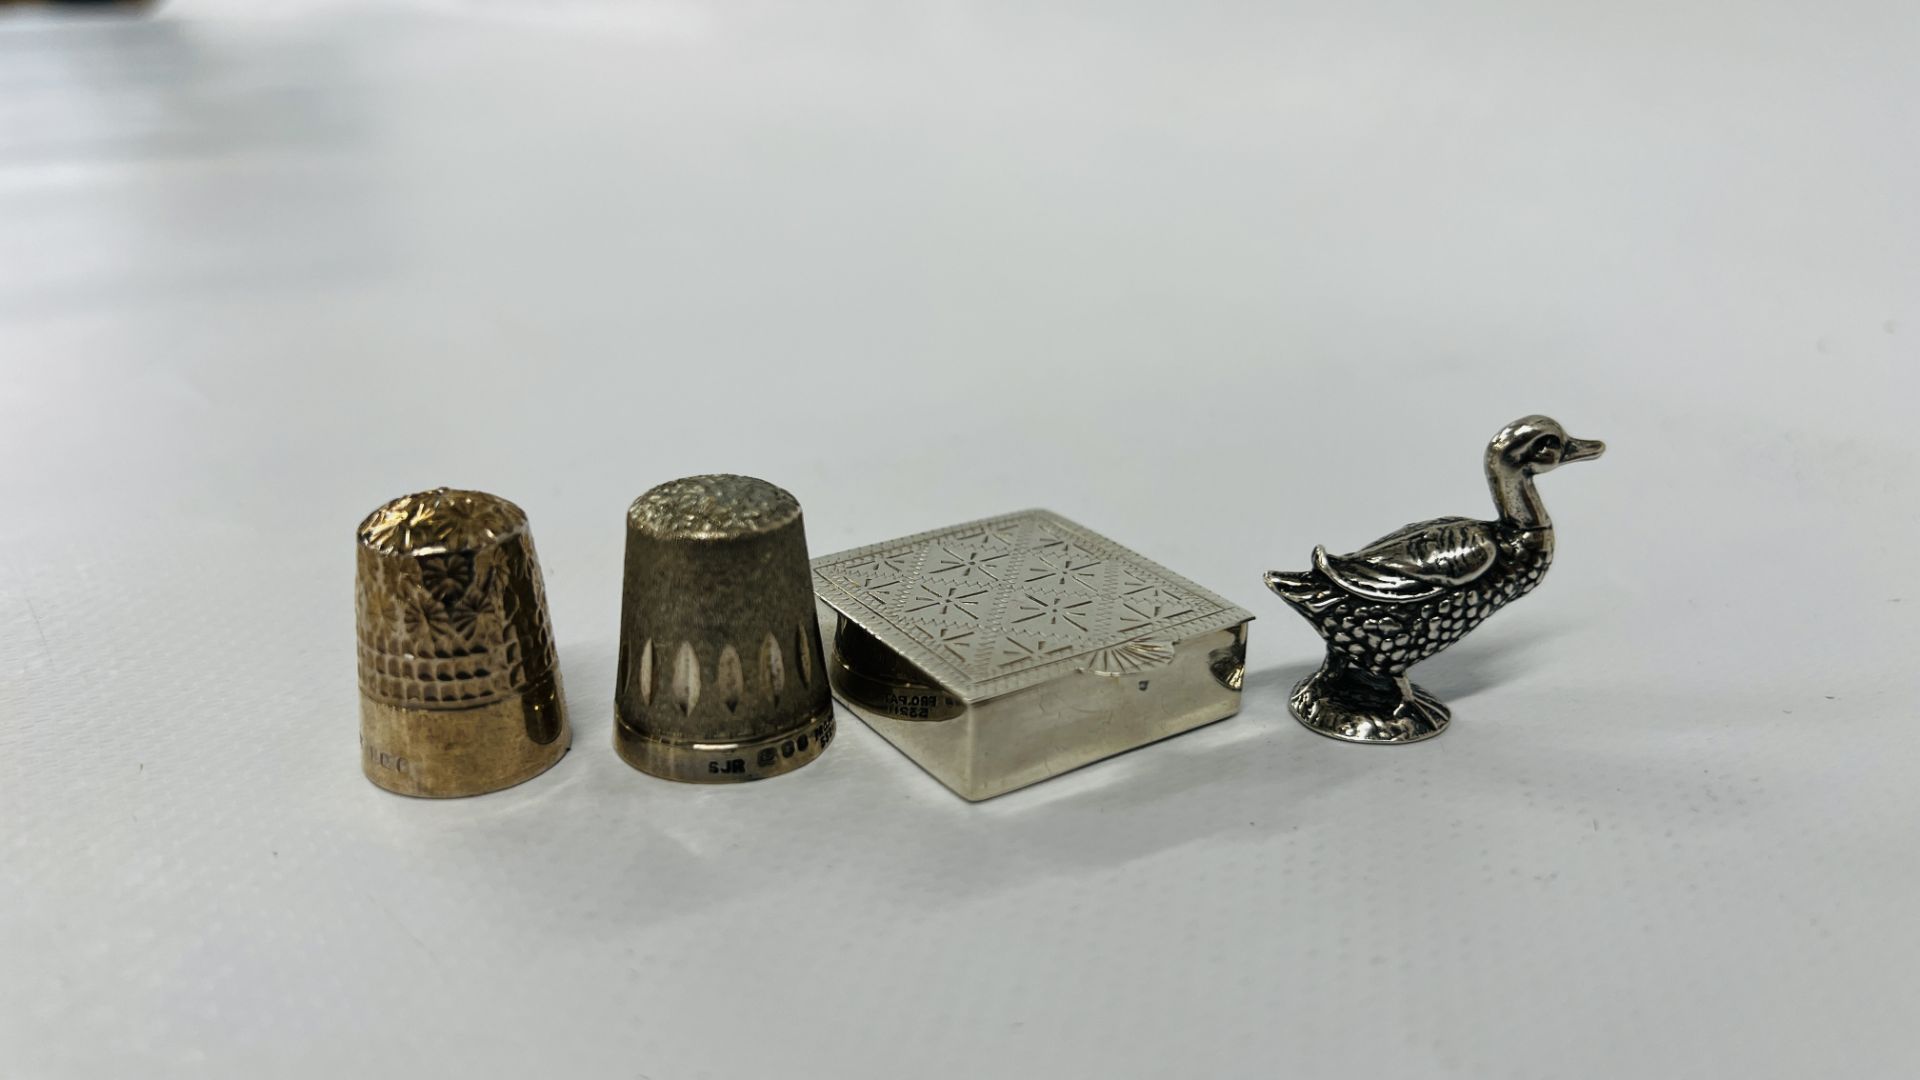 A SOLID SILVER DUCK, SILVER ENGRAVED PILL BOX AND 2 SILVER THIMBLES.